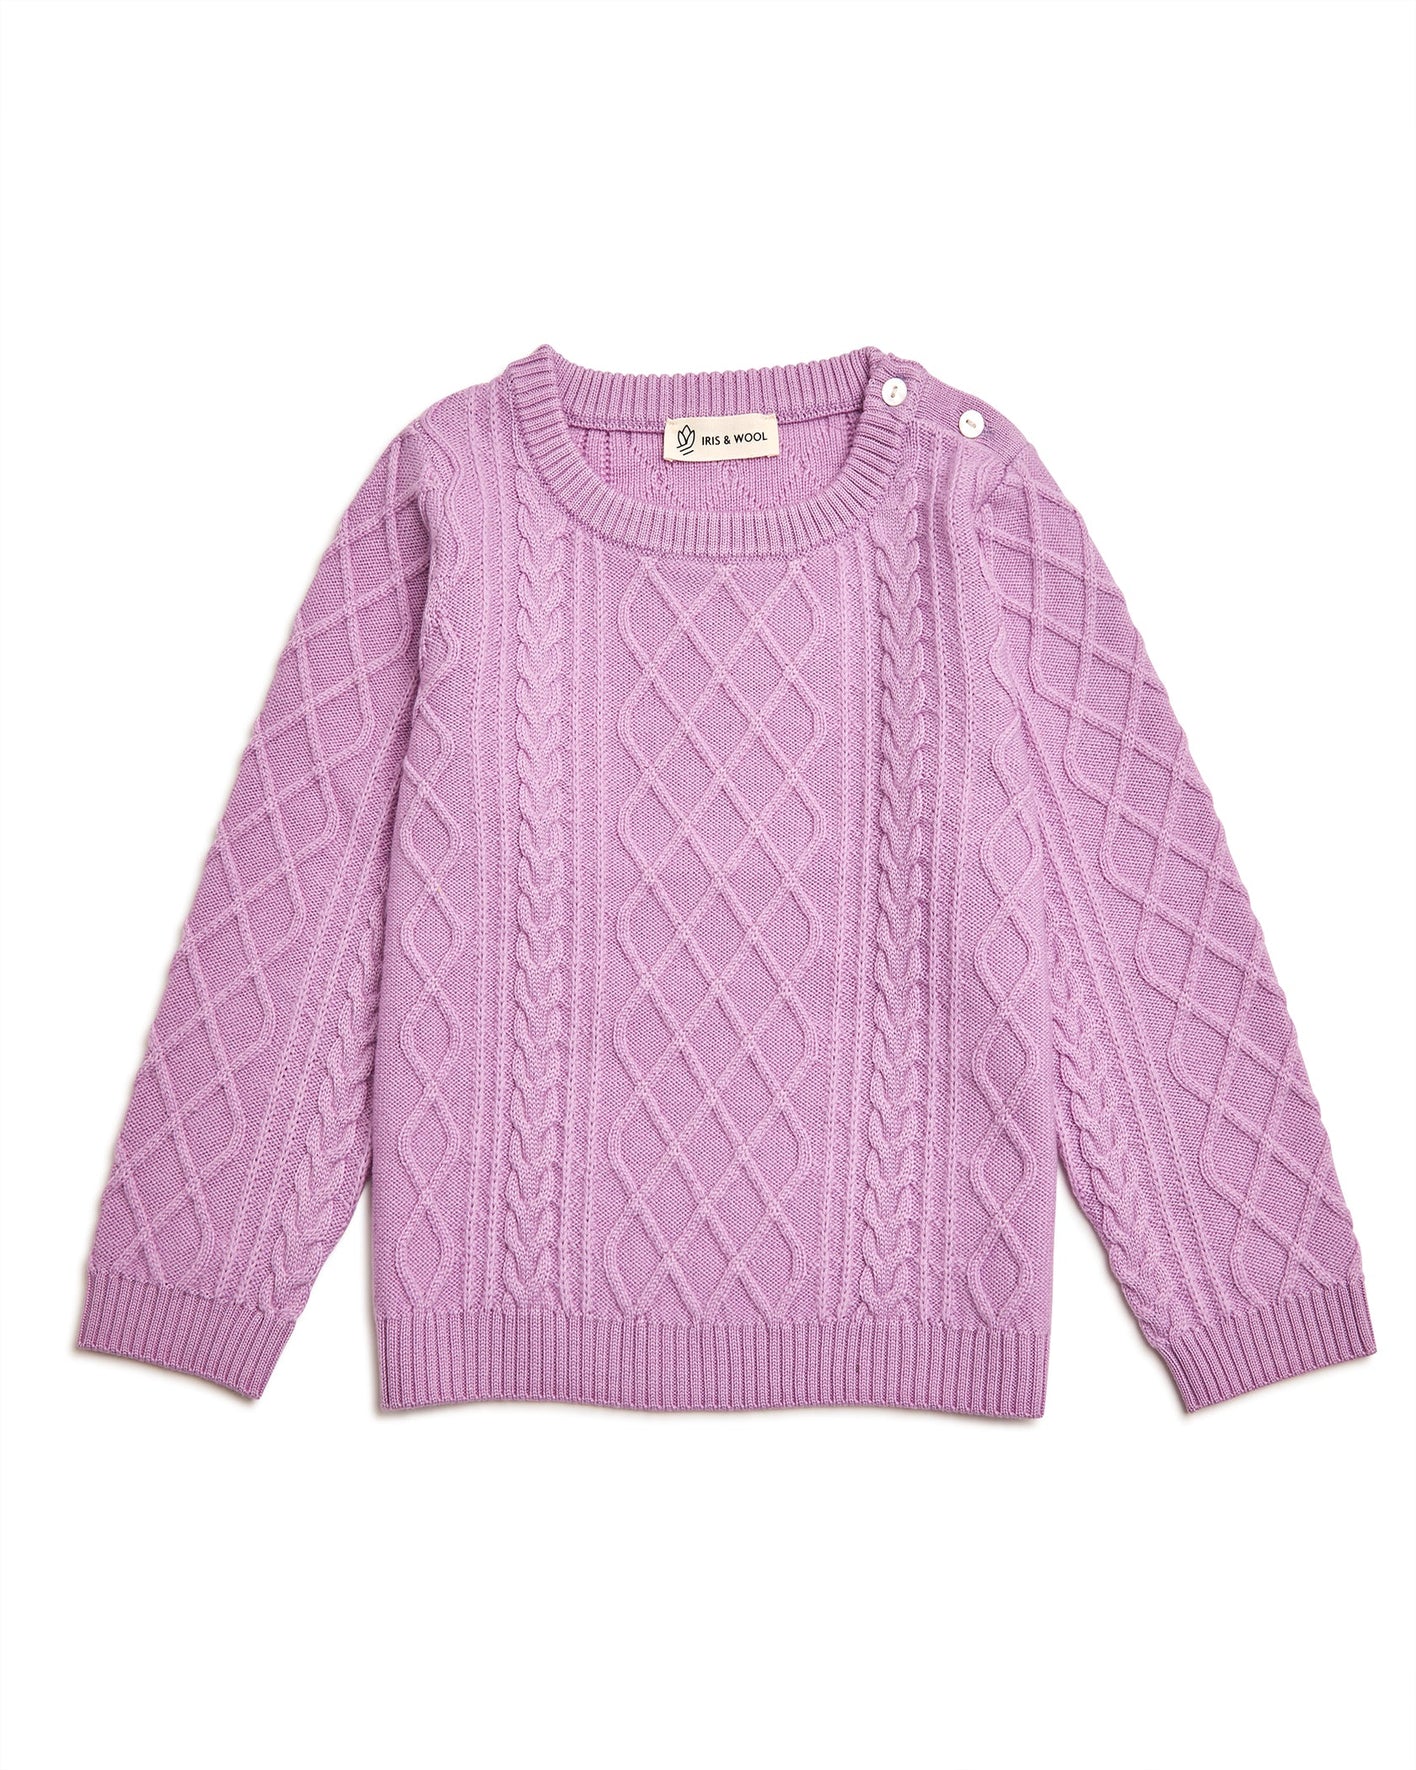 Iris and Wool Pink Cable Sweater